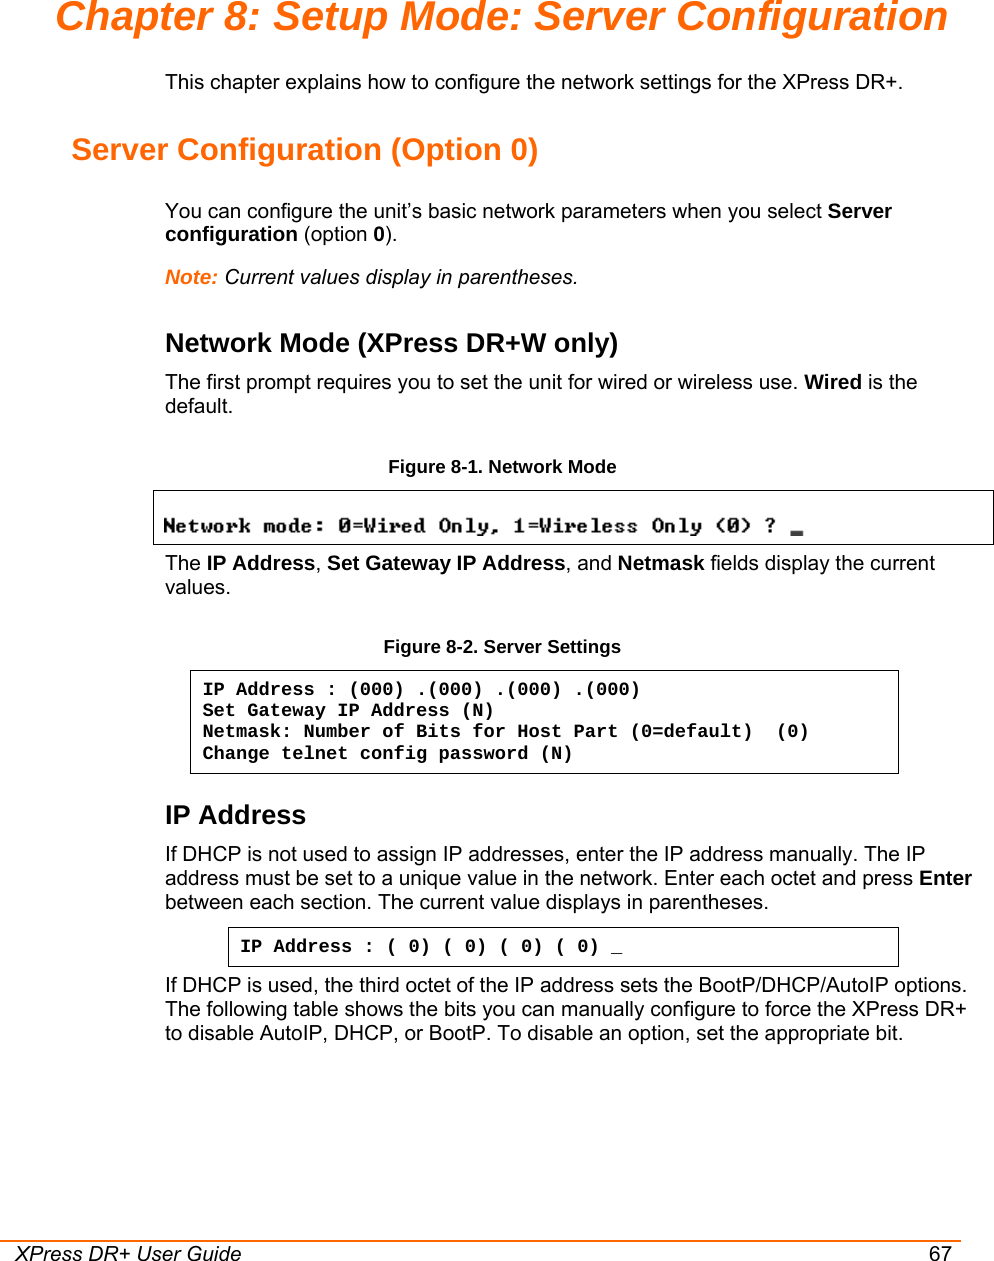  XPress DR+ User Guide 67 Chapter 8: Setup Mode: Server Configuration This chapter explains how to configure the network settings for the XPress DR+.  Server Configuration (Option 0) You can configure the unit’s basic network parameters when you select Server configuration (option 0).  Note: Current values display in parentheses. Network Mode (XPress DR+W only) The first prompt requires you to set the unit for wired or wireless use. Wired is the default.  Figure 8-1. Network Mode  The IP Address, Set Gateway IP Address, and Netmask fields display the current values. Figure 8-2. Server Settings IP Address : (000) .(000) .(000) .(000) Set Gateway IP Address (N) Netmask: Number of Bits for Host Part (0=default)  (0) Change telnet config password (N) IP Address  If DHCP is not used to assign IP addresses, enter the IP address manually. The IP address must be set to a unique value in the network. Enter each octet and press Enter between each section. The current value displays in parentheses. IP Address : ( 0) ( 0) ( 0) ( 0) _ If DHCP is used, the third octet of the IP address sets the BootP/DHCP/AutoIP options. The following table shows the bits you can manually configure to force the XPress DR+ to disable AutoIP, DHCP, or BootP. To disable an option, set the appropriate bit. 